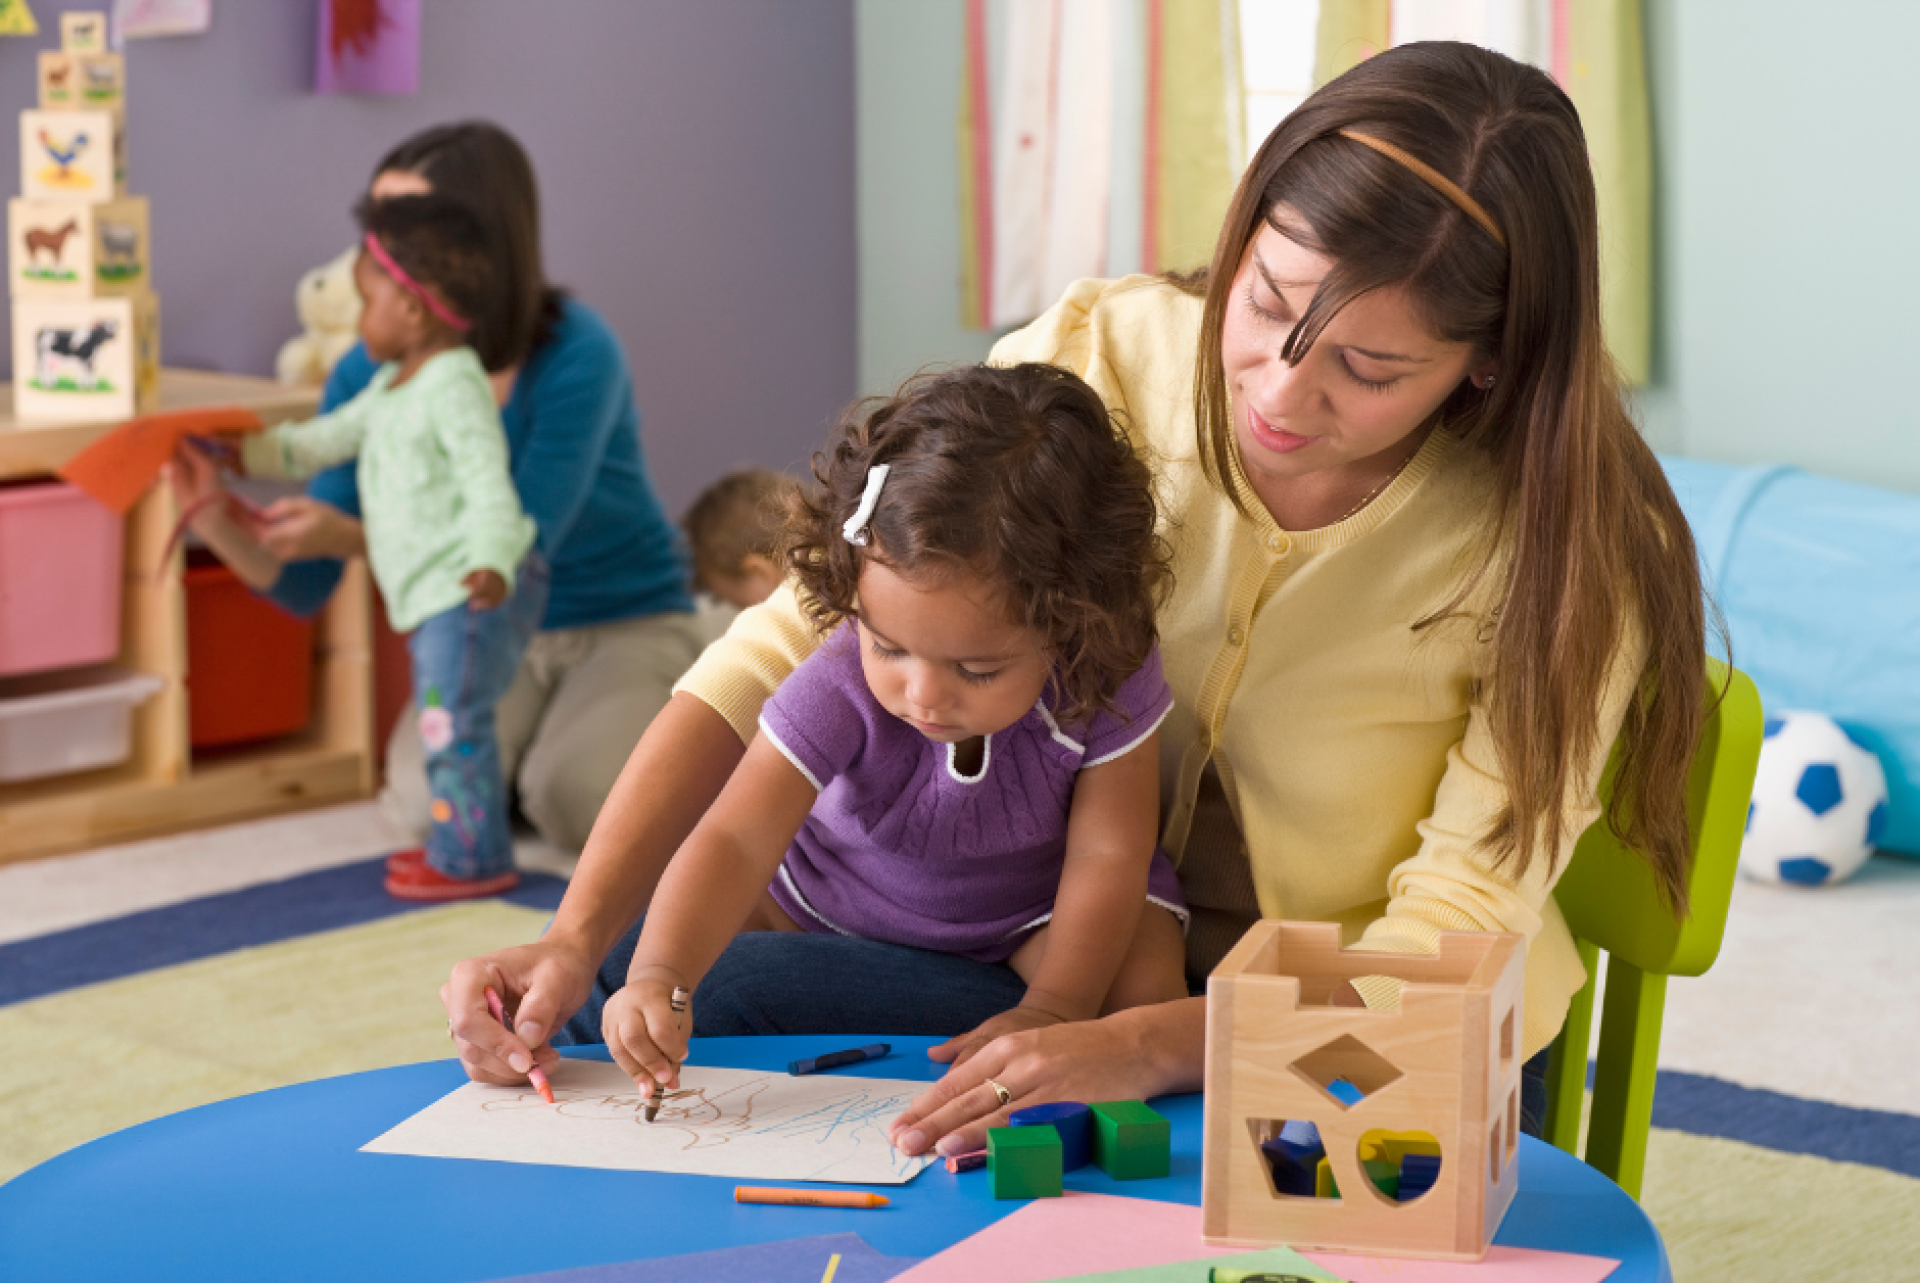 Support Child Care Centers in Meeting the Needs of All Children